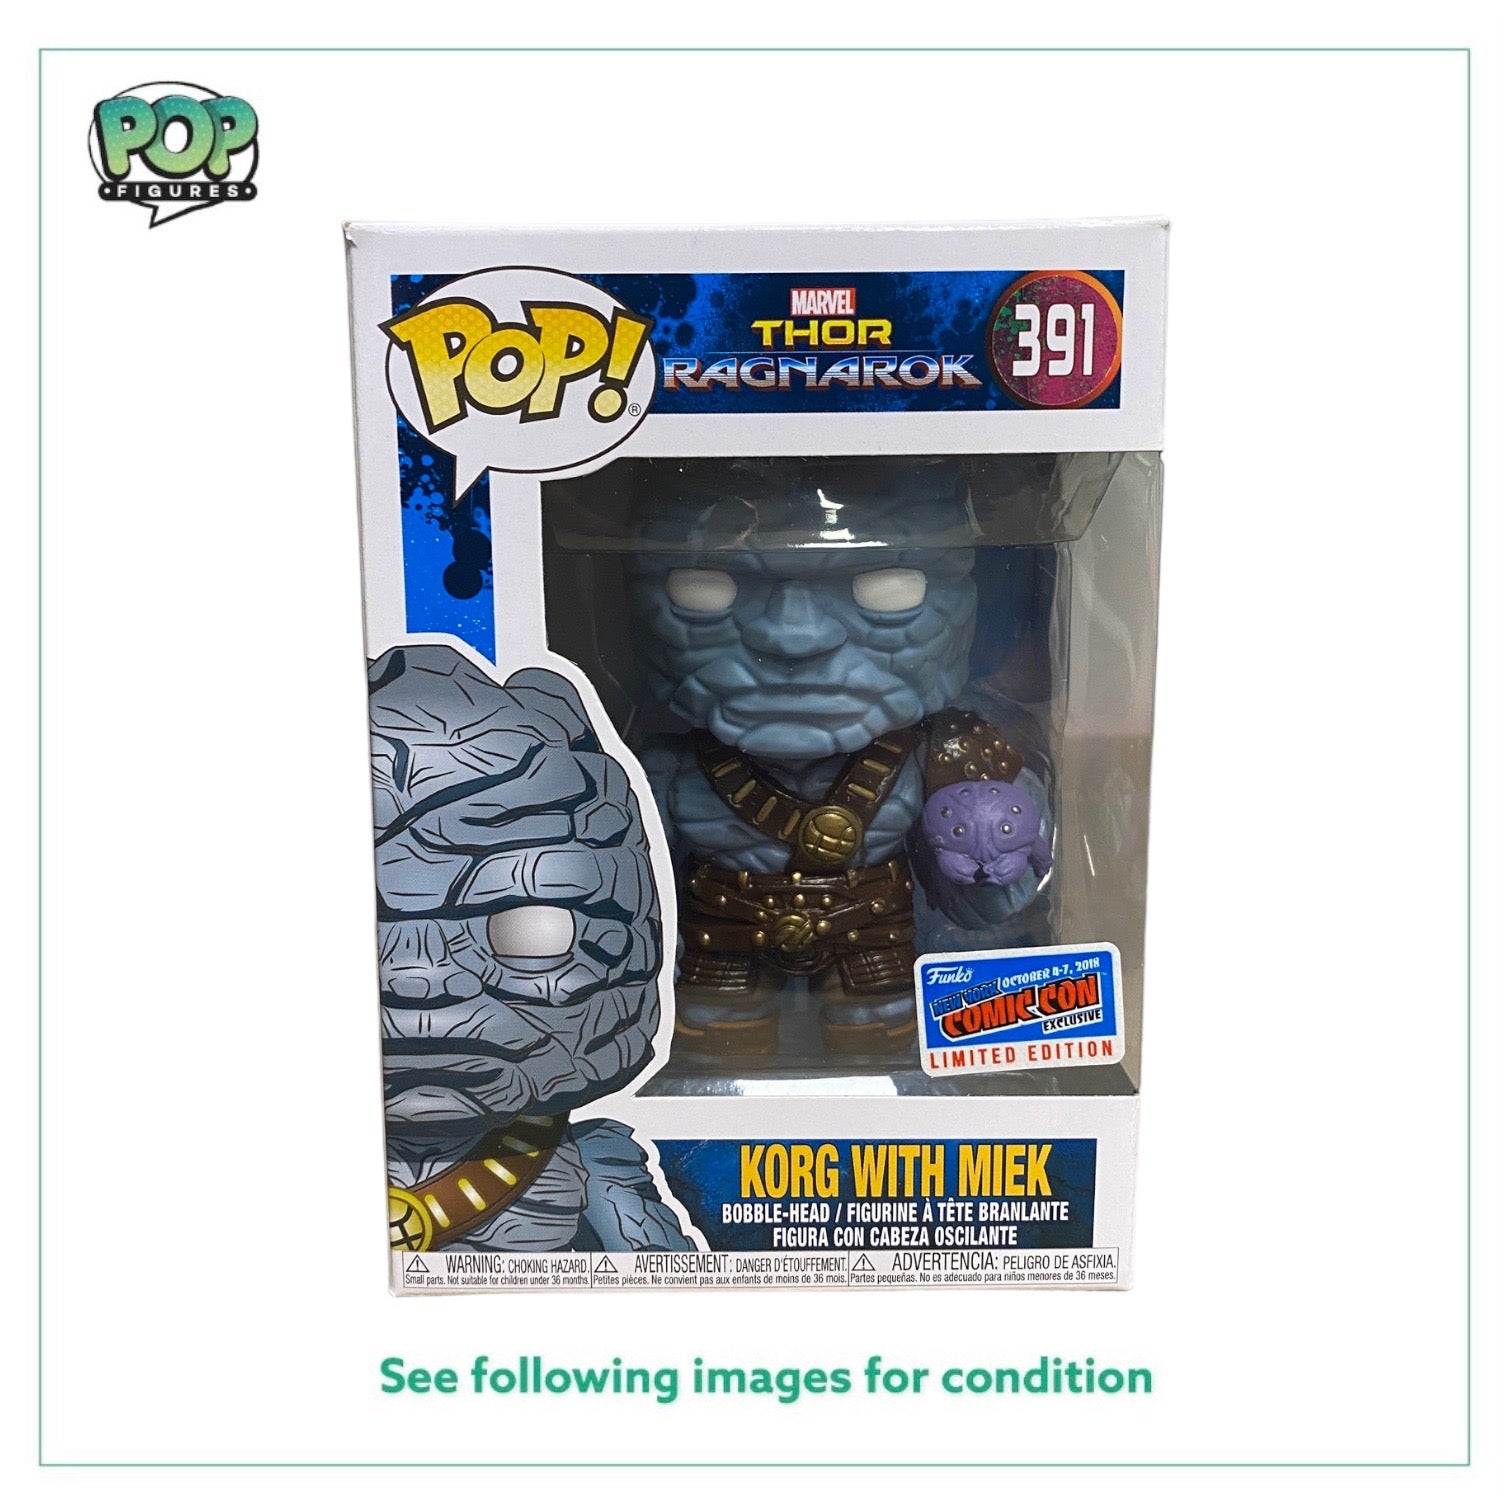 Korg With Miek #391 Funko Pop! - Thor Ragnarok - NYCC 2018 Official Convention Exclusive - Condition 8/10